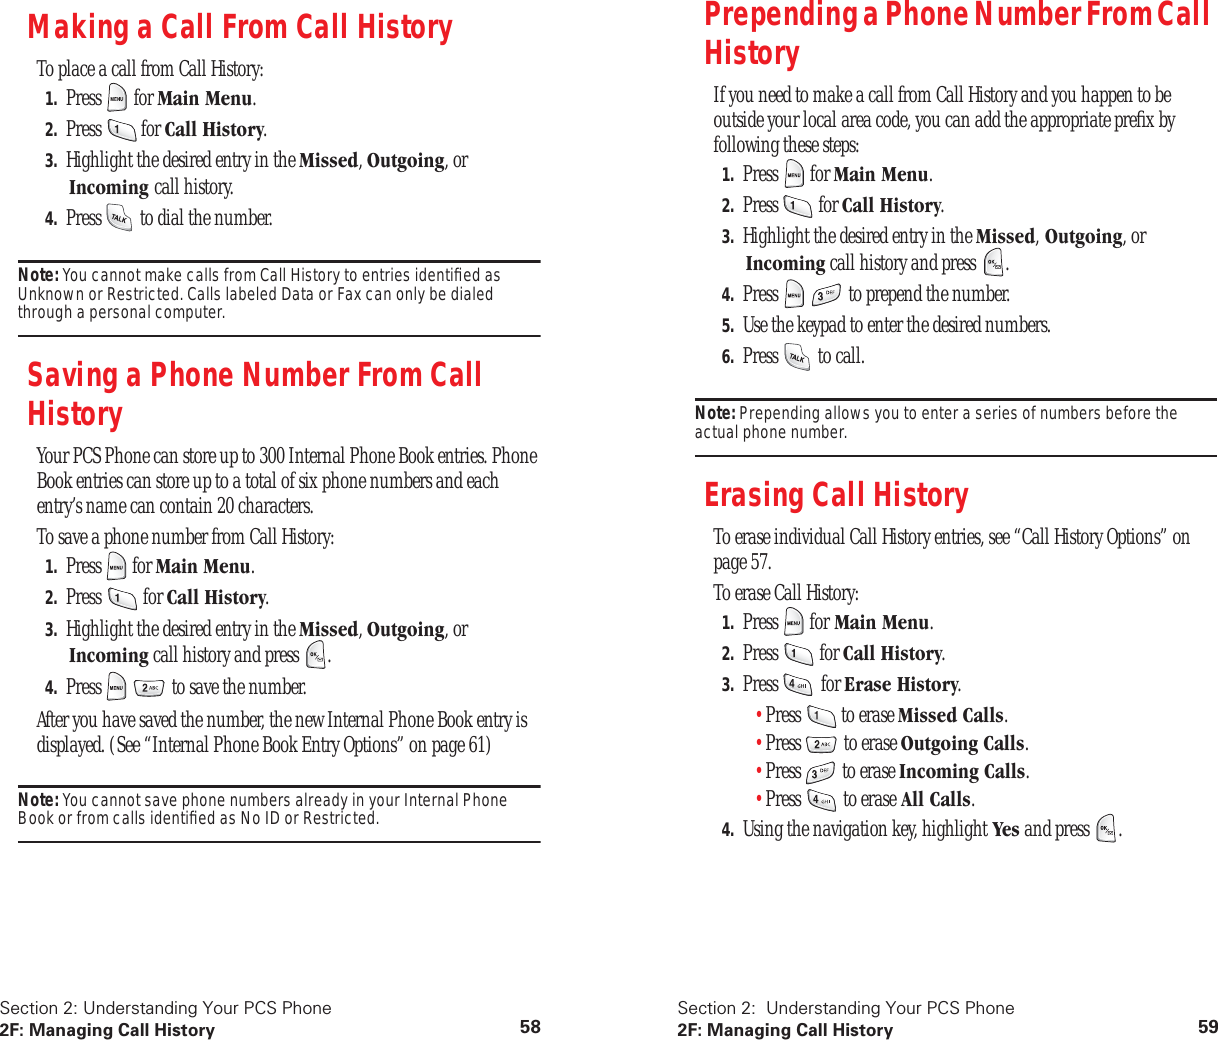 Section 2: Understanding Your PCS Phone2F: Managing Call History 58Making a Call From Call HistoryTo place a call from Call History:1. Press  for Main Menu.2. Press  for Call History.3. Highlight the desired entry in the Missed, Outgoing, or Incoming call history.4. Press   to dial the number.Note: You cannot make calls from Call History to entries identiﬁed as Unknown or Restricted. Calls labeled Data or Fax can only be dialed through a personal computer.Saving a Phone Number From Call HistoryYour PCS Phone can store up to 300 Internal Phone Book entries. Phone Book entries can store up to a total of six phone numbers and each entry’s name can contain 20 characters.To save a phone number from Call History:1. Press  for Main Menu.2. Press  for Call History.3. Highlight the desired entry in the Missed, Outgoing, or Incoming call history and press  .4. Press     to save the number.After you have saved the number, the new Internal Phone Book entry is displayed. (See “Internal Phone Book Entry Options” on page 61)Note: You cannot save phone numbers already in your Internal Phone Book or from calls identiﬁed as No ID or Restricted.Section 2:  Understanding Your PCS Phone2F: Managing Call History 59Prepending a Phone Number From Call HistoryIf you need to make a call from Call History and you happen to be outside your local area code, you can add the appropriate preﬁx by following these steps:1. Press  for Main Menu.2. Press  for Call History.3. Highlight the desired entry in the Missed, Outgoing, or Incoming call history and press  .4. Press     to prepend the number.5. Use the keypad to enter the desired numbers.6. Press   to call.Note: Prepending allows you to enter a series of numbers before the actual phone number.Erasing Call HistoryTo erase individual Call History entries, see “Call History Options” on page 57.To erase Call History:1. Press  for Main Menu.2. Press  for Call History.3. Press  for Erase History.•Press   to erase Missed Calls.•Press   to erase Outgoing Calls.•Press   to erase Incoming Calls.•Press   to erase All Calls.4. Using the navigation key, highlight Yes and press  .